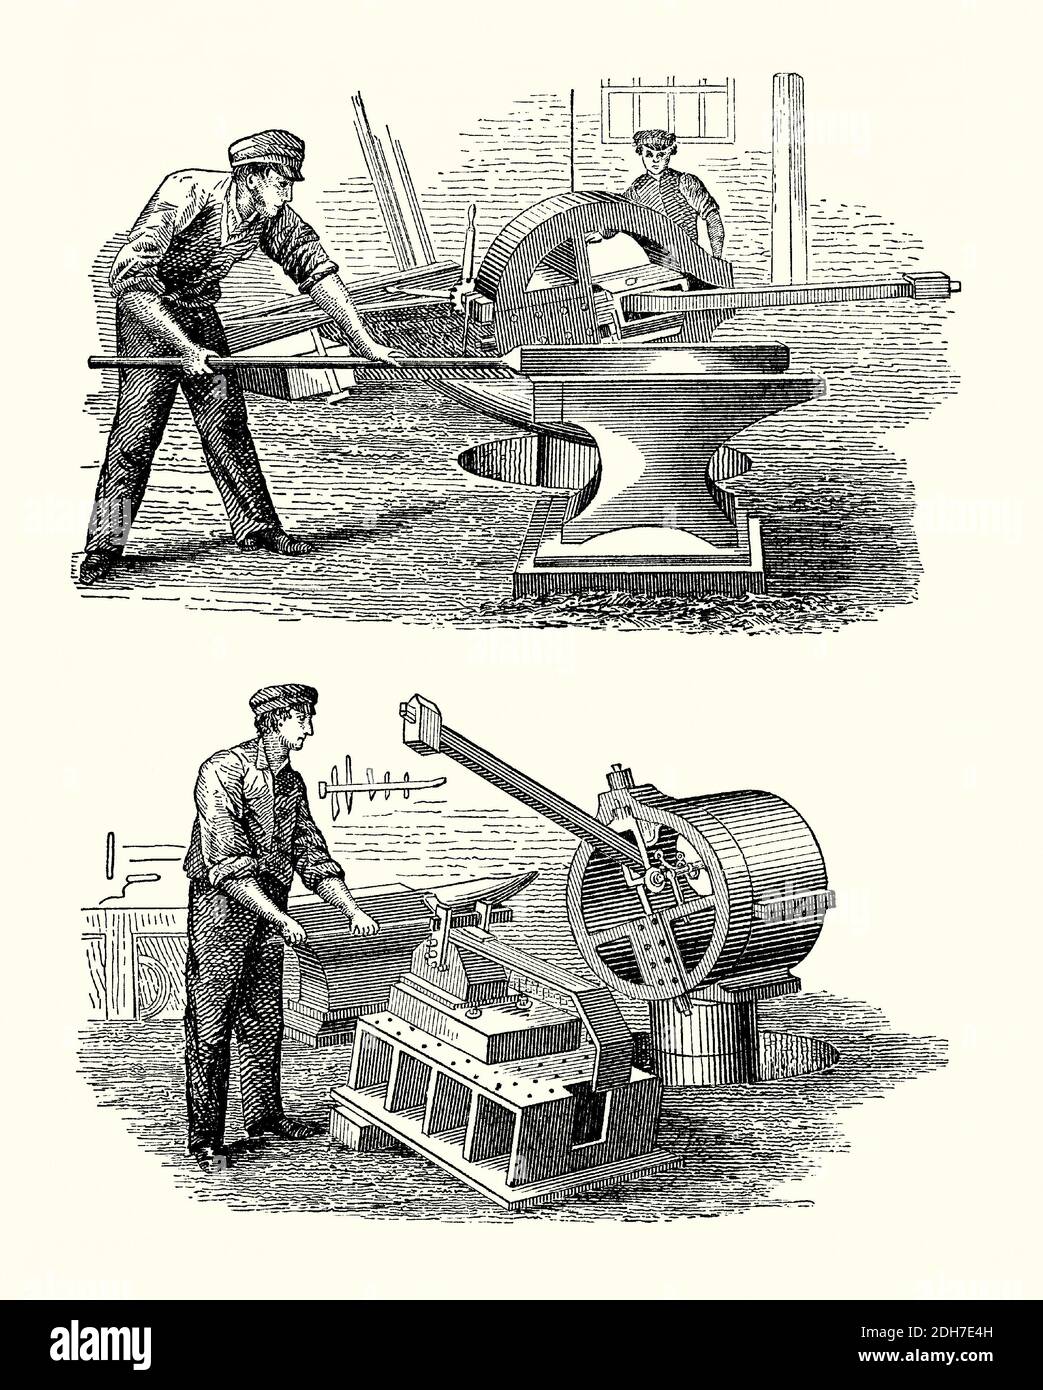 An old engraving of a striker, a trip hammer powered directly from an engine used in an iron foundry in the 1800s. It is from a Victorian mechanical engineering book of the 1880s. A trip hammer (tilt hammer or helve hammer) is a massive powered hammer. In forges and foundries they were used for drawing out wrought iron blooms into more workable bar iron, fabricating wrought iron and other metals. The hammers were usually raised by a cam and then released to fall under the force of gravity. They could be adjusted to allow a strike from various angles. Stock Photo